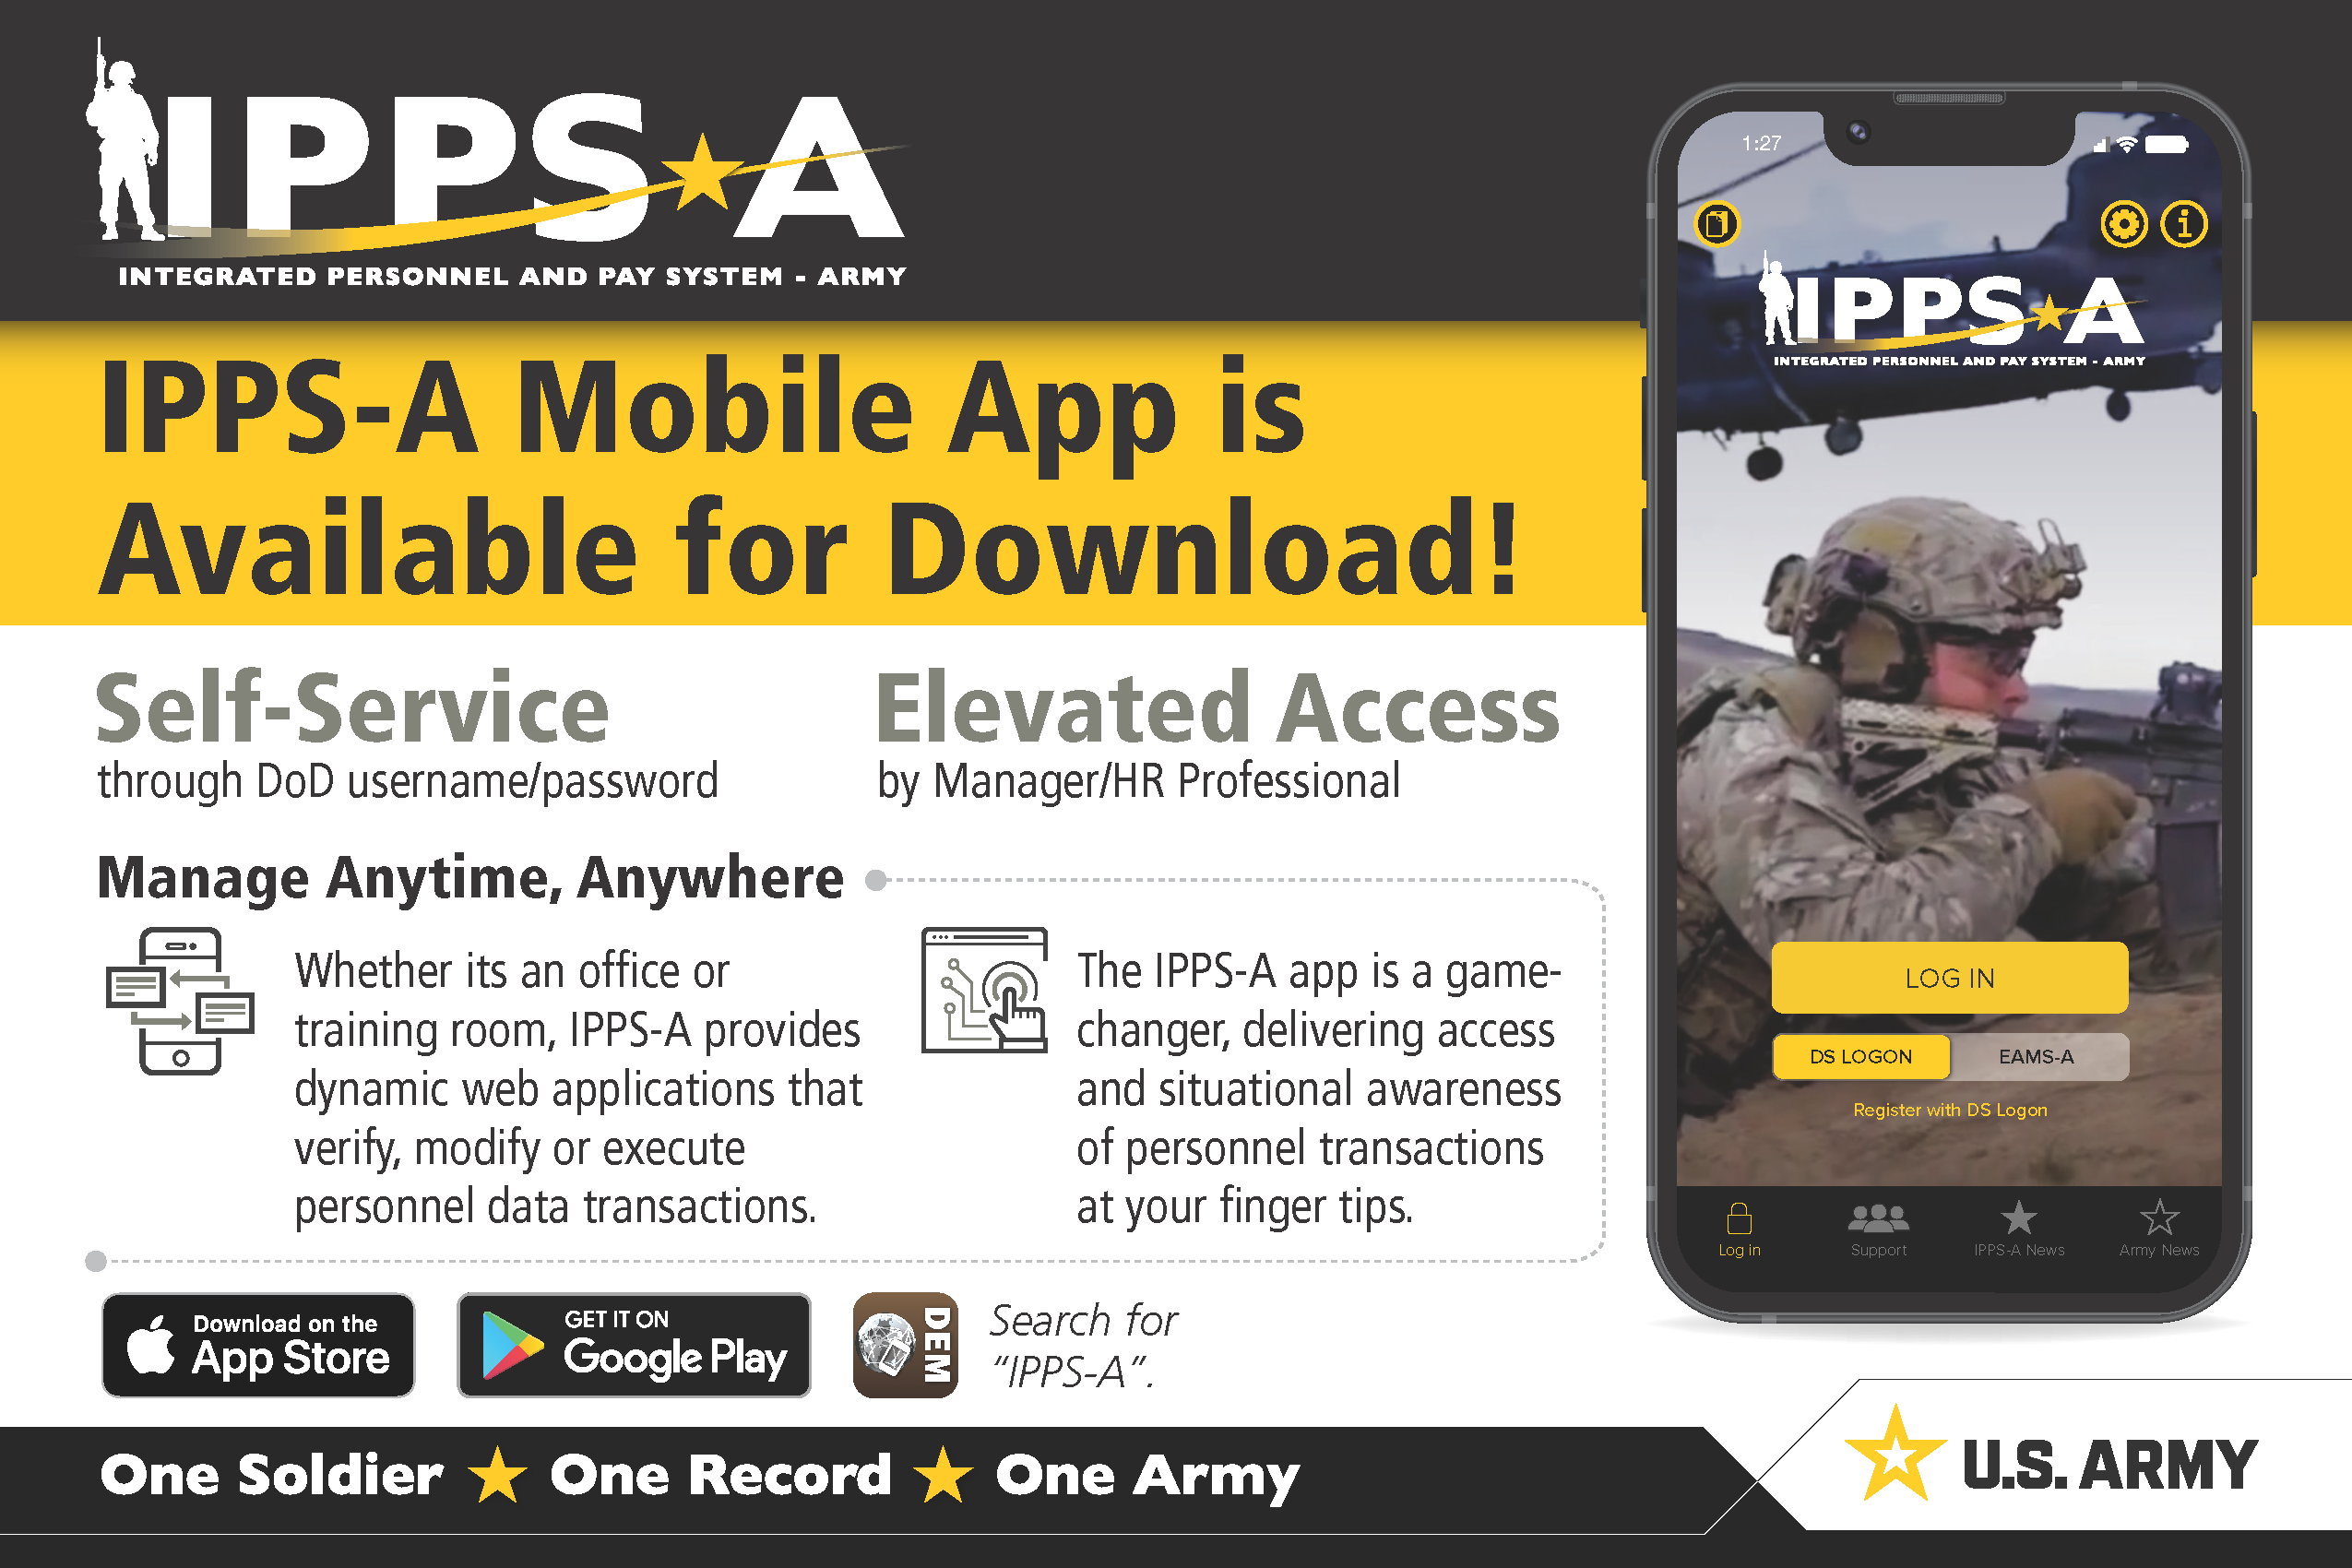 Informational one-pager on how to download the IPPS-A mobile app